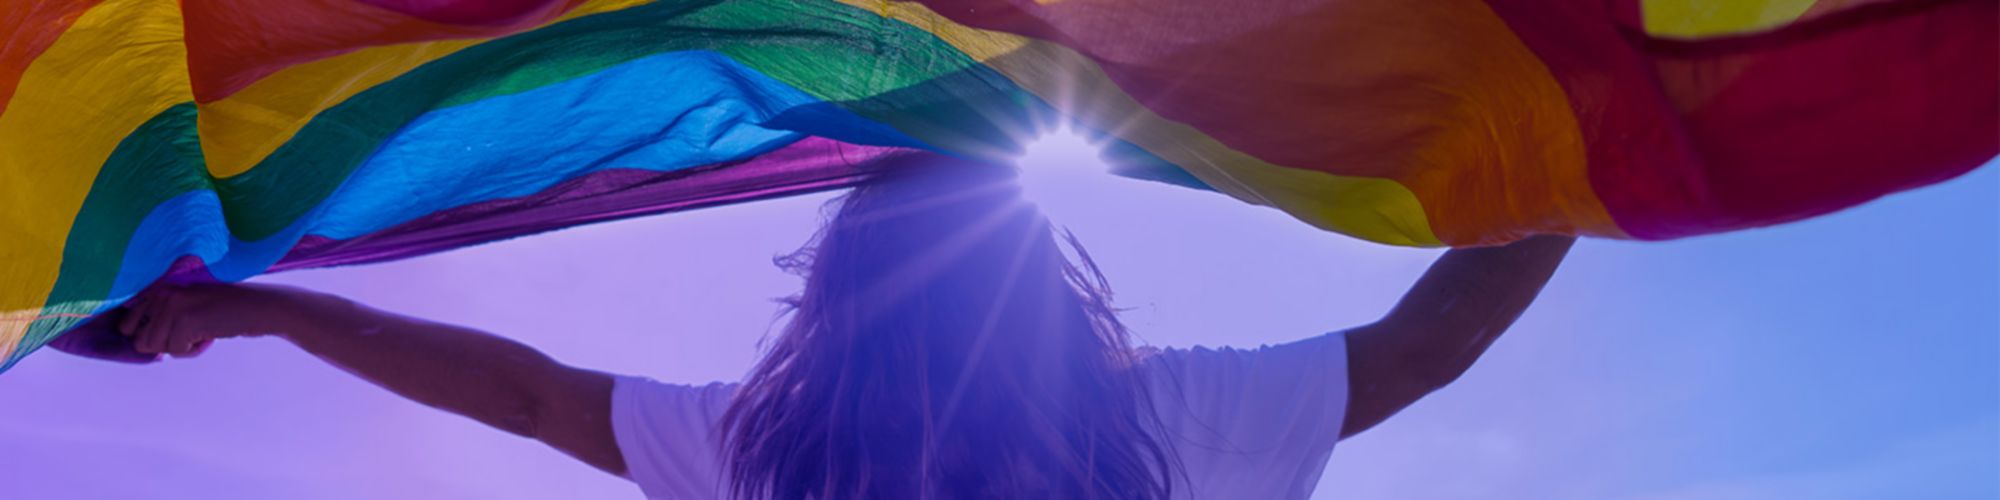 Woman with pride flag